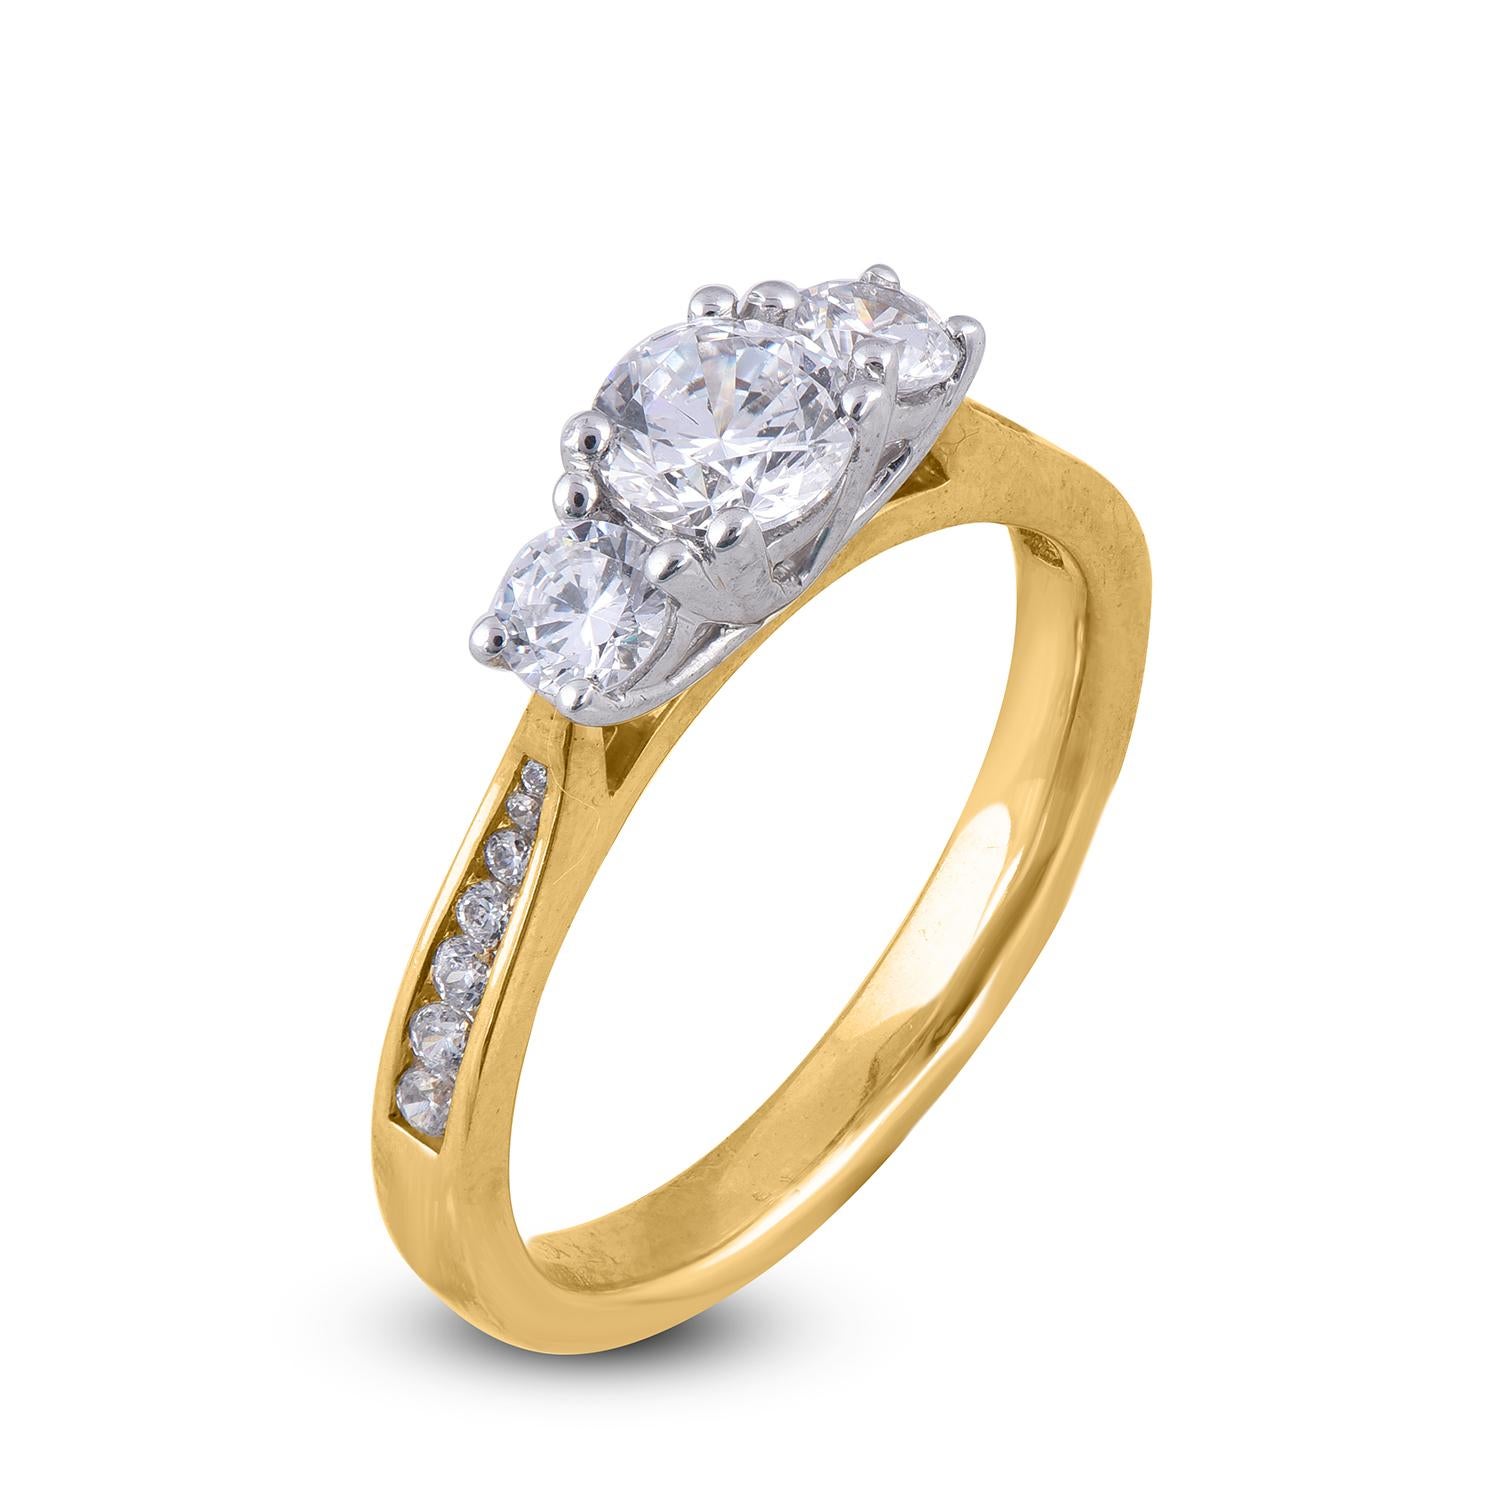 This elegant diamond ring shines bright with 3 center stone and handcrafted in 18 karat Yellow gold. it features 17 diamonds 0.50ct of centre stone and each side diamond is 0.19 ct and remaining diamond on shank lined secured in prong and channel